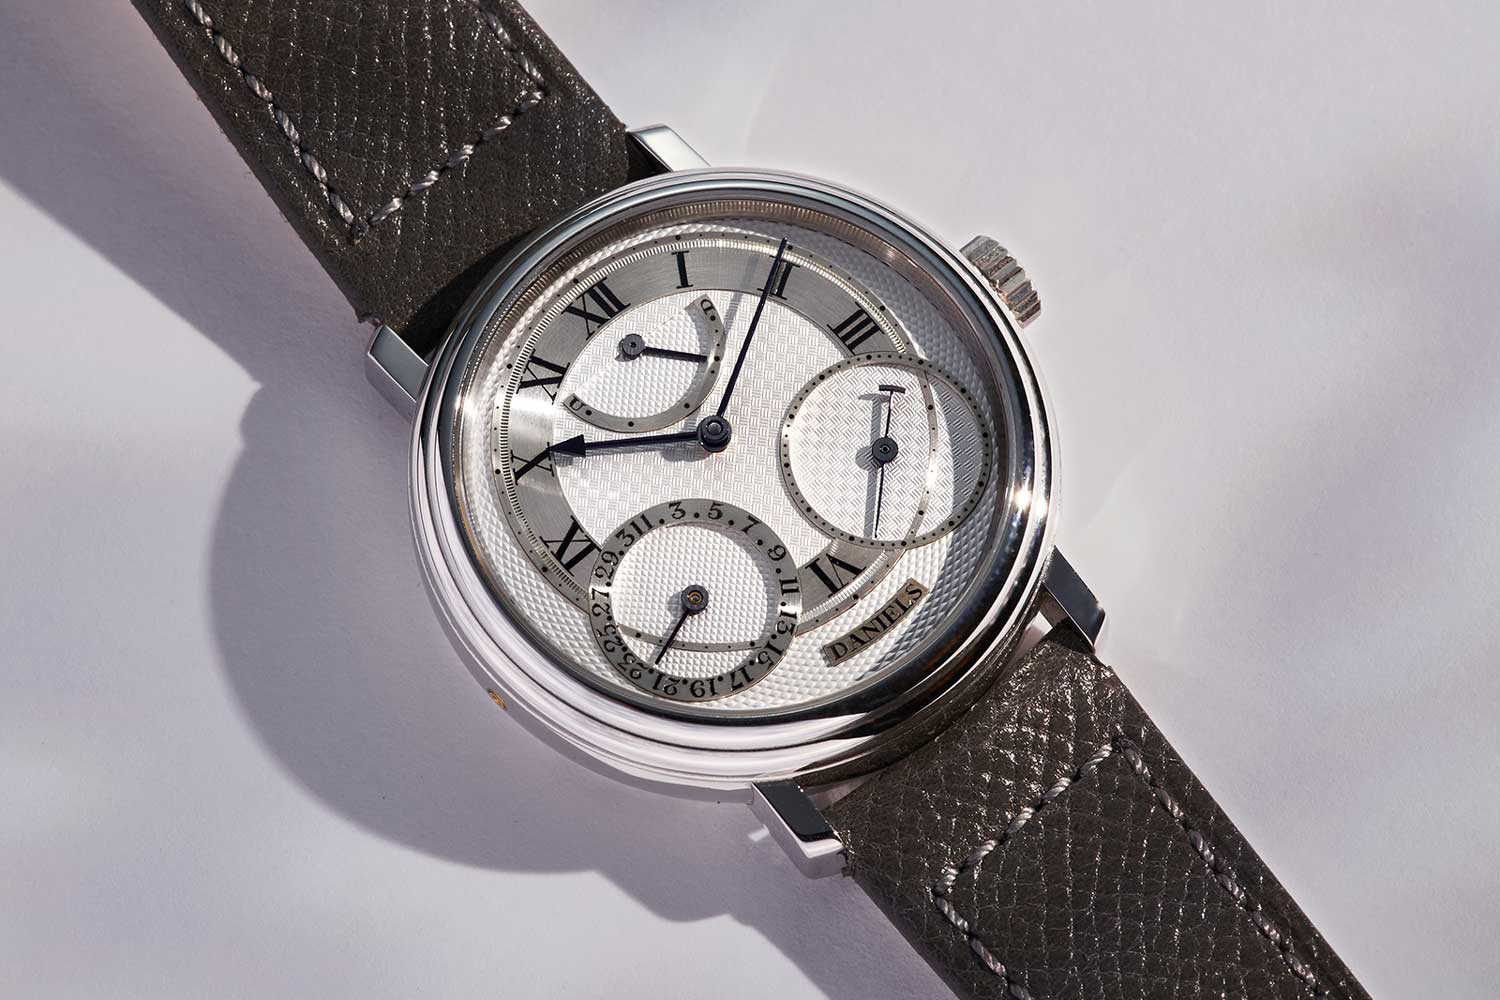 This example is one of just four Anniversary watches made in platinum and the only one bearing the number "00" across all metals